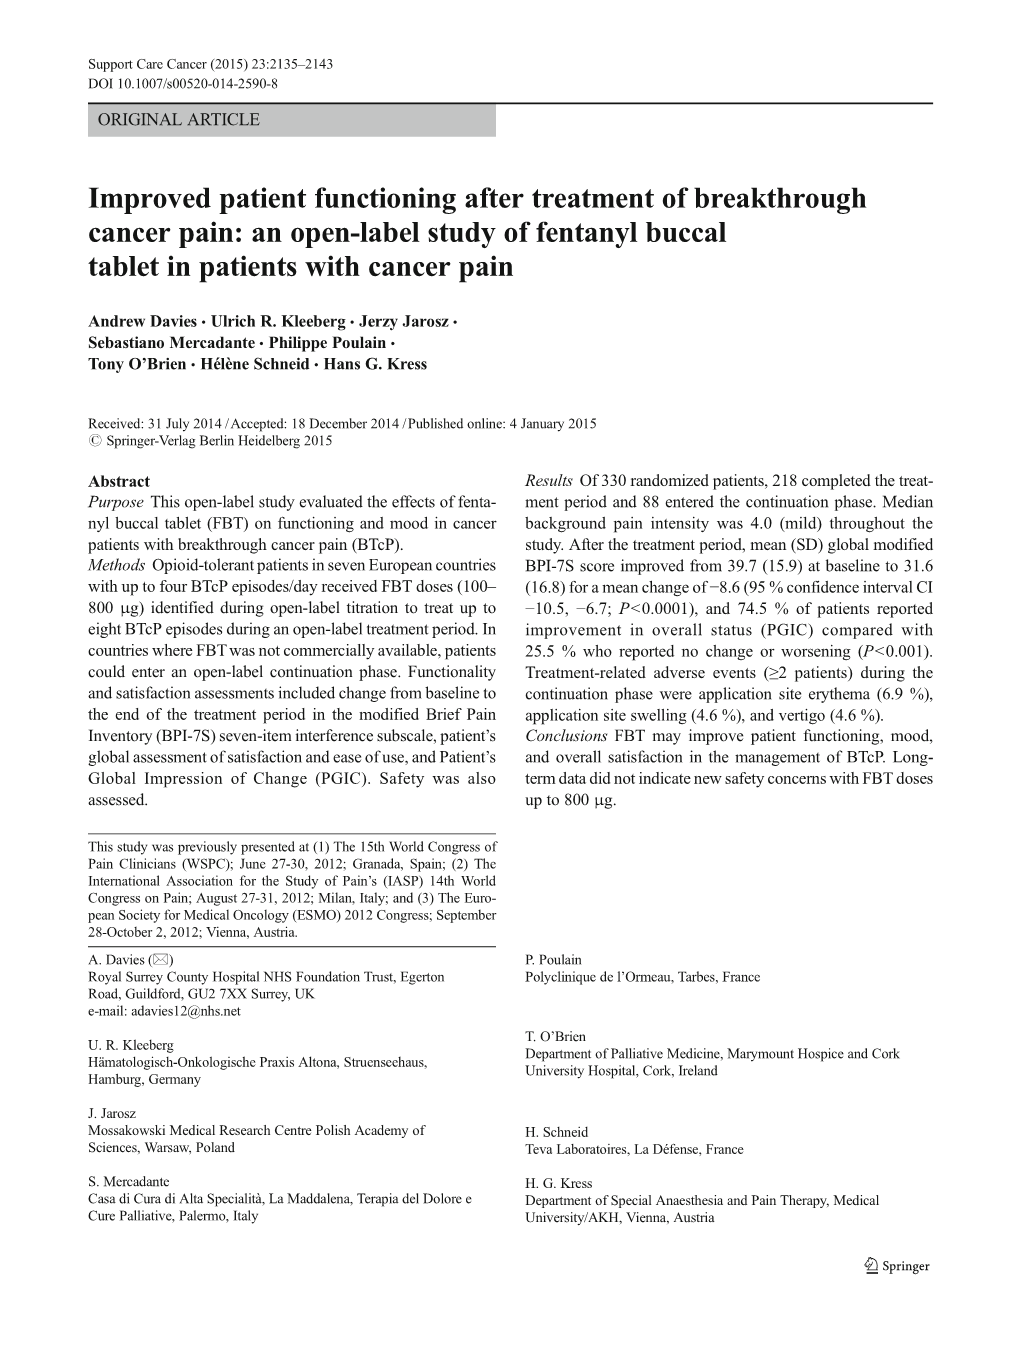 Improved Patient Functioning After Treatment of Breakthrough Cancer Pain: an Open-Label Study of Fentanyl Buccal Tablet in Patients with Cancer Pain